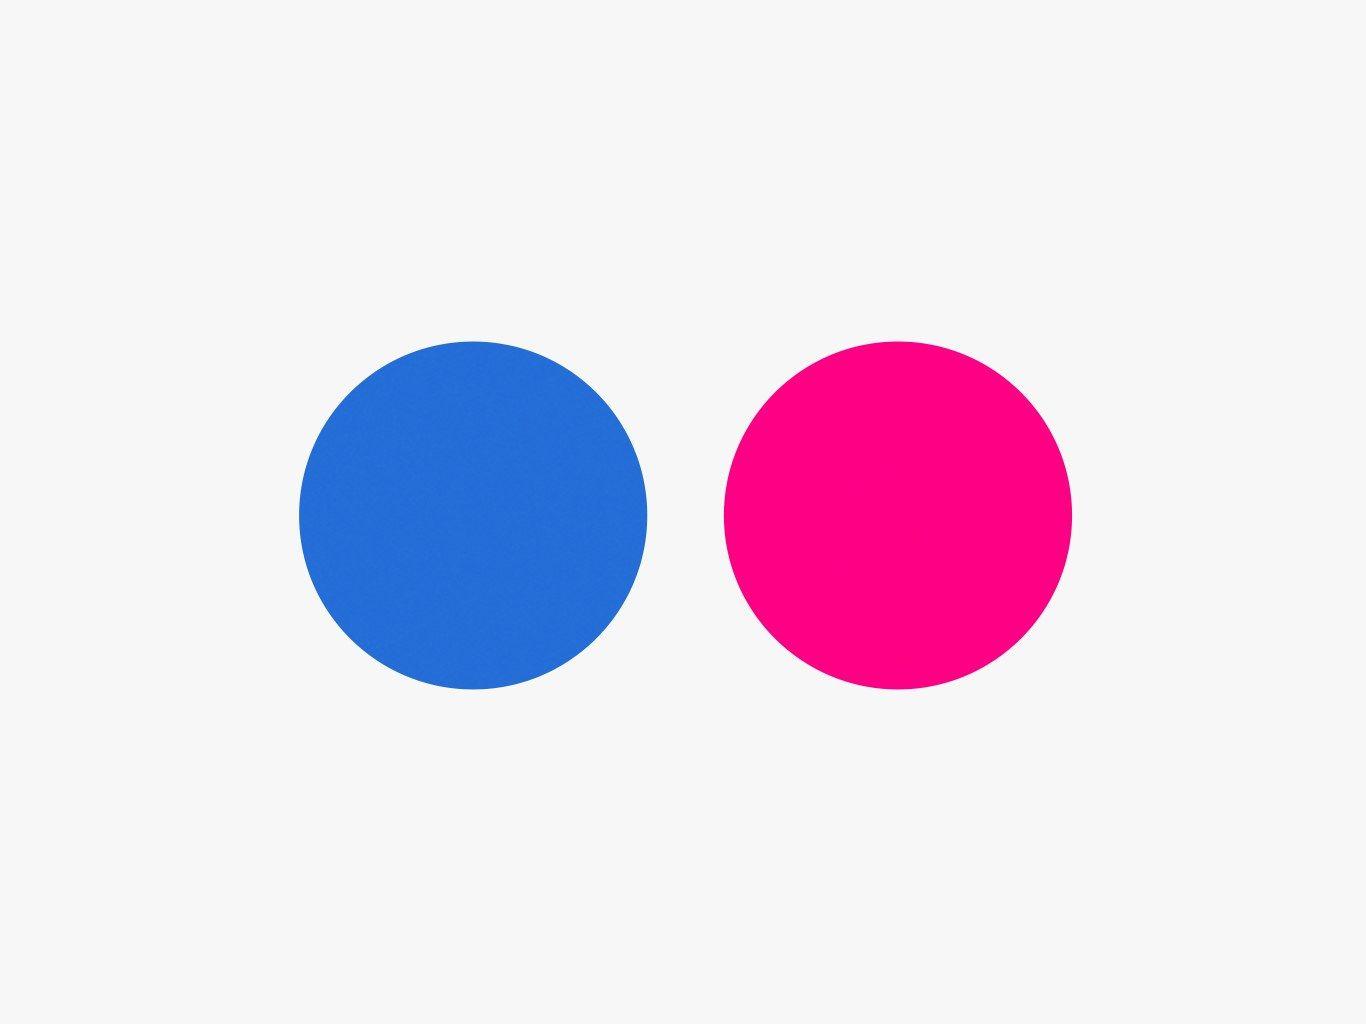 Official Flickr Logo - Uploading Photos to Flickr Is No Longer Free, So Bye Flickr | WIRED